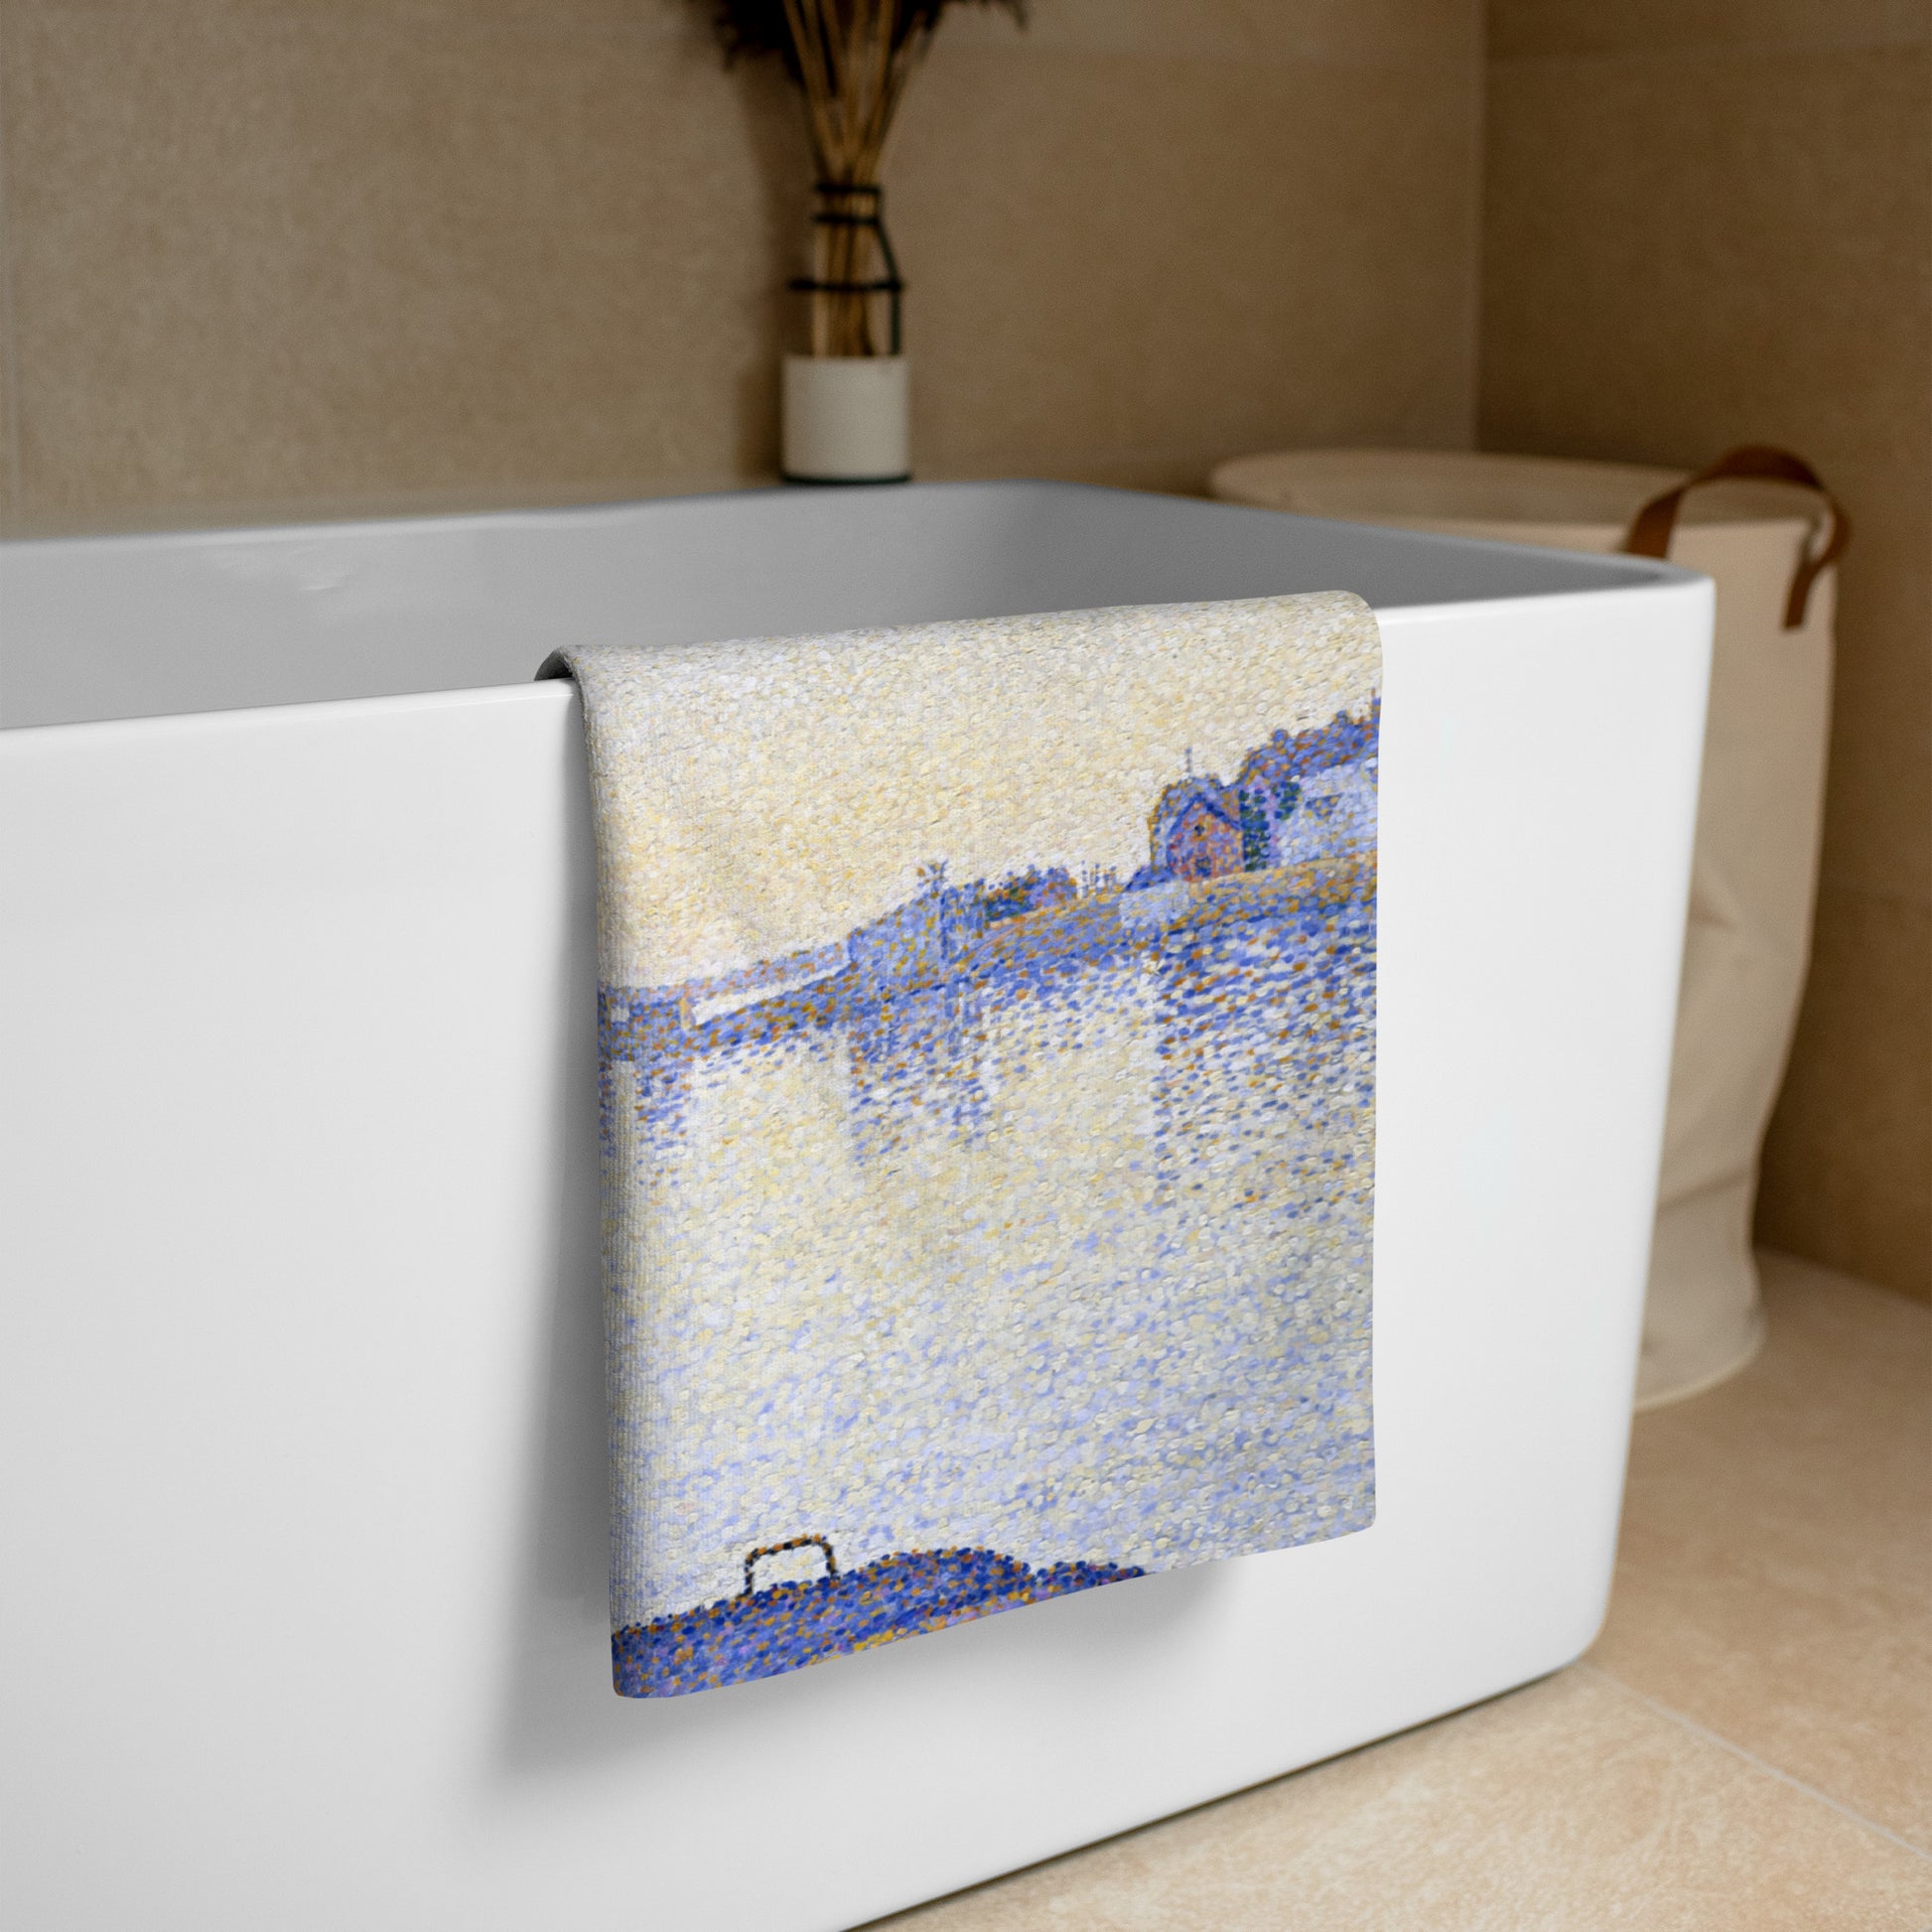 Beach towel featuring painting 'Evening calm, Concarneau' by Paul Signac, hanging over a white bath